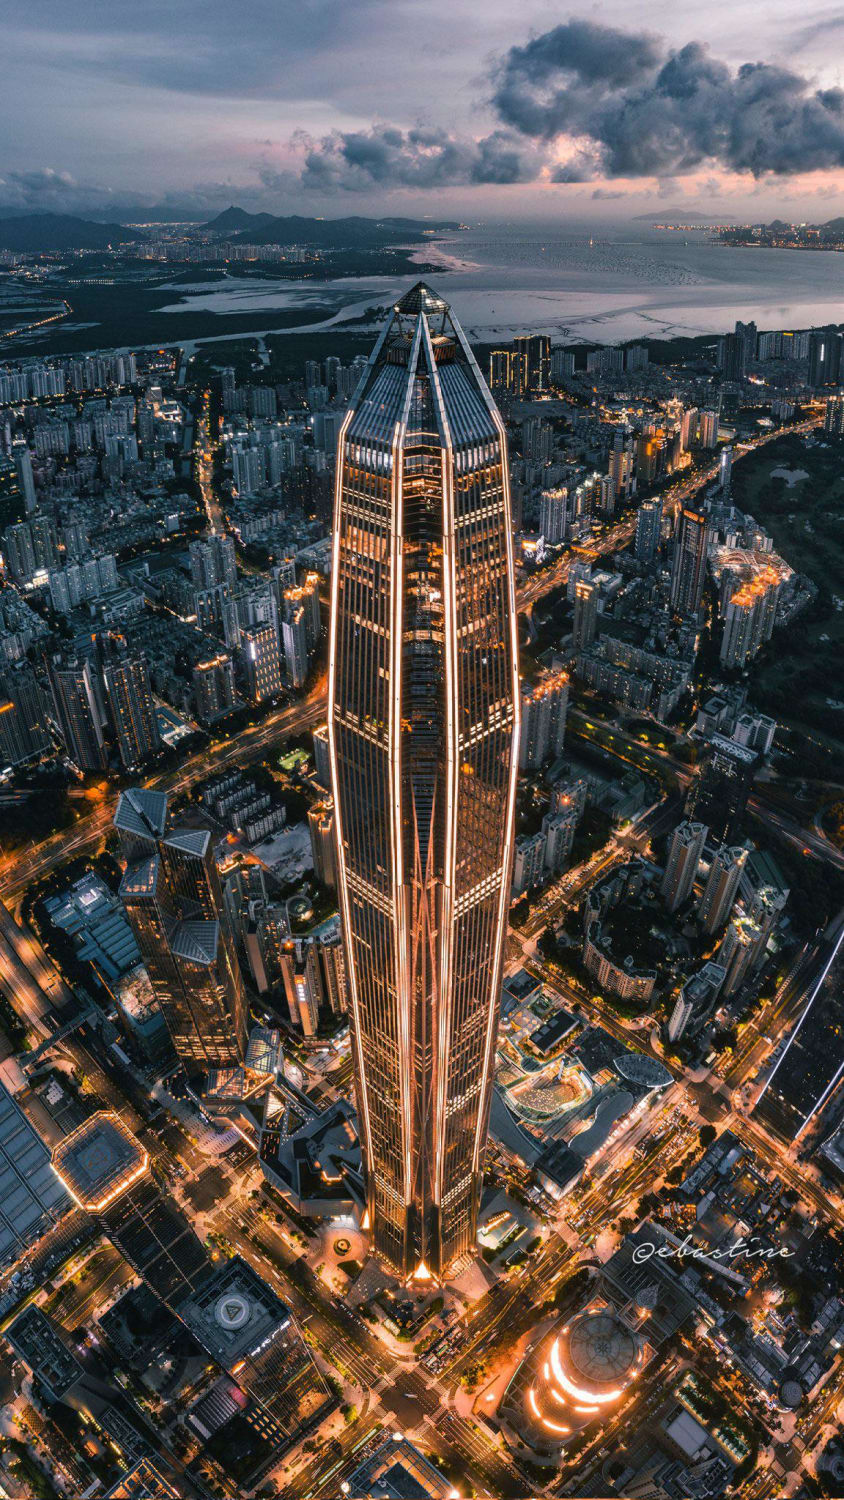 5th tallest building in the world. Ping An finance center in Shenzhen